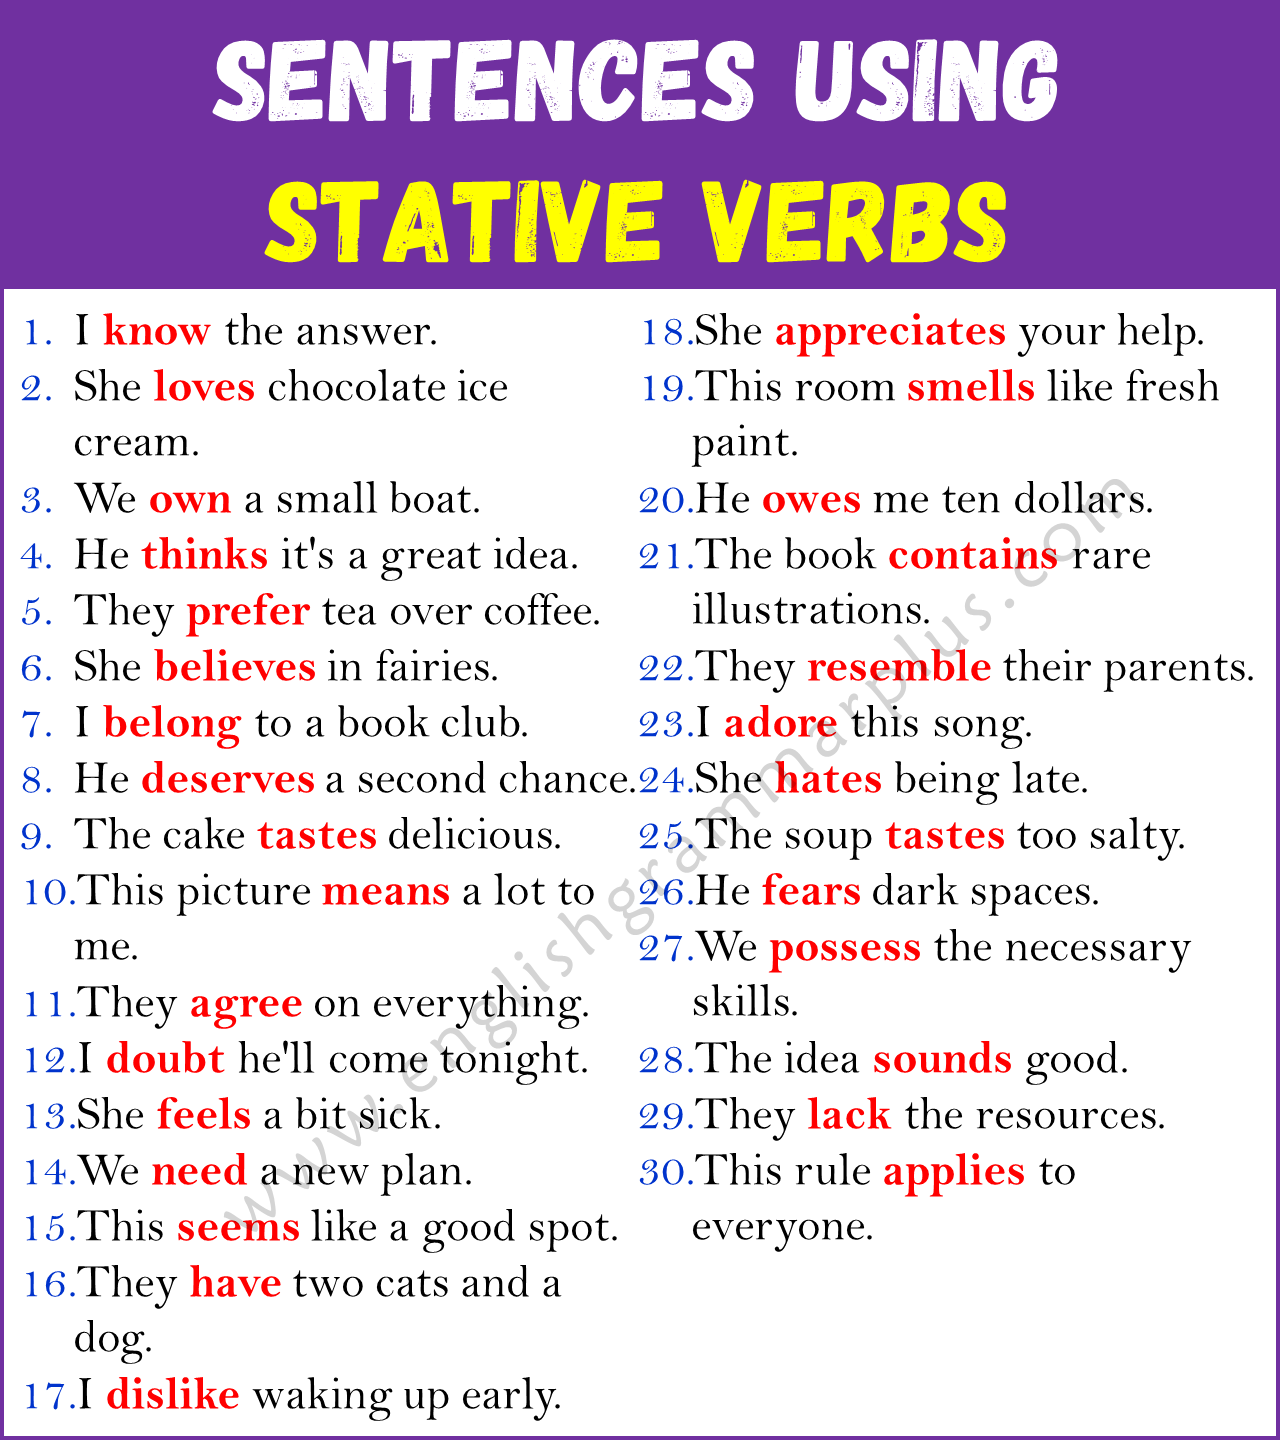 Examples of Stative Verbs in Sentences